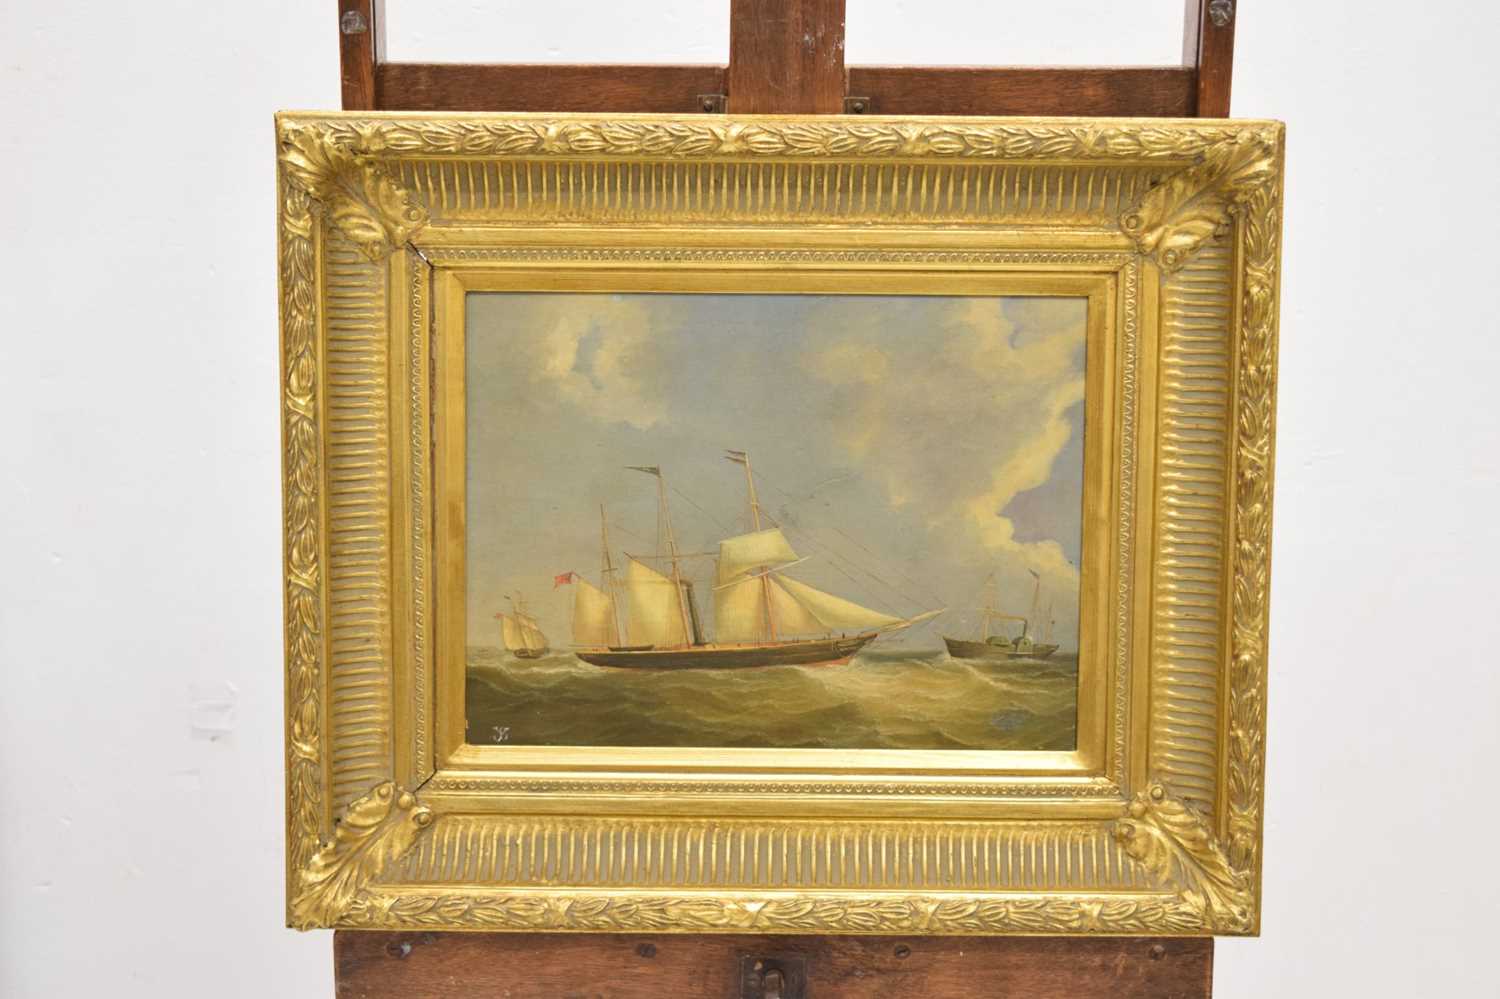 20th century Continental School - Oil on panel - Pair of maritime studies - Image 7 of 15